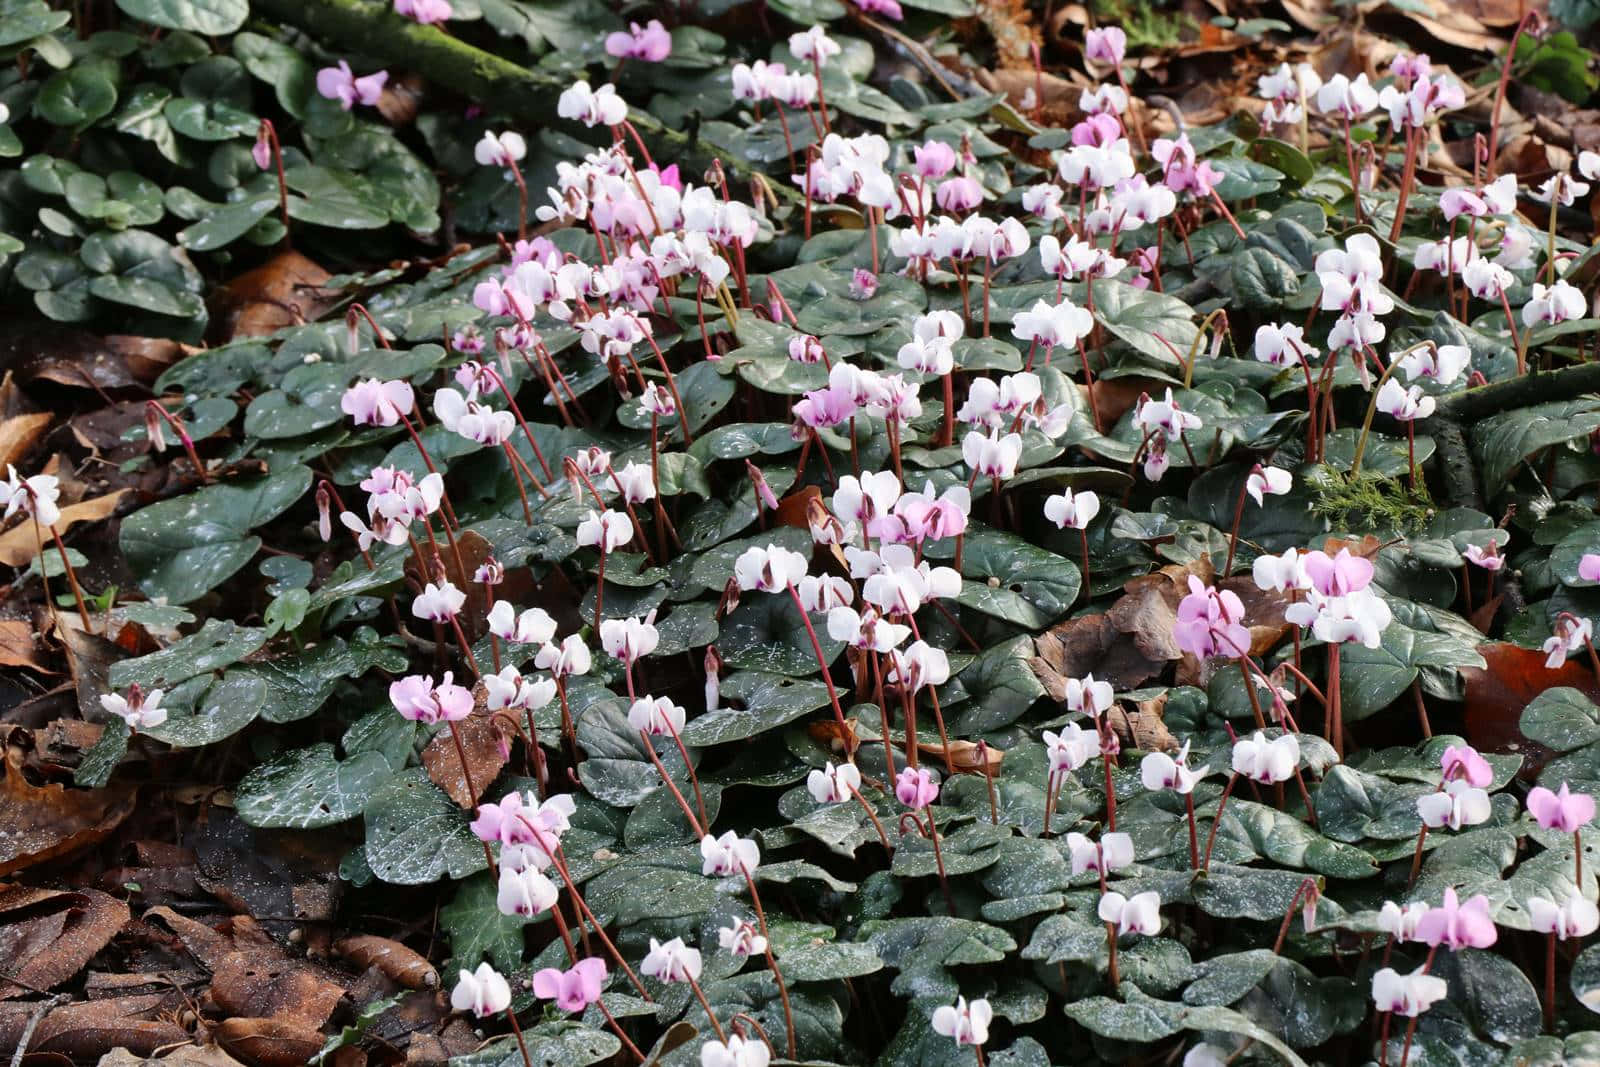 A cluster of delicate Cyclamen flowers in soft shades of purple